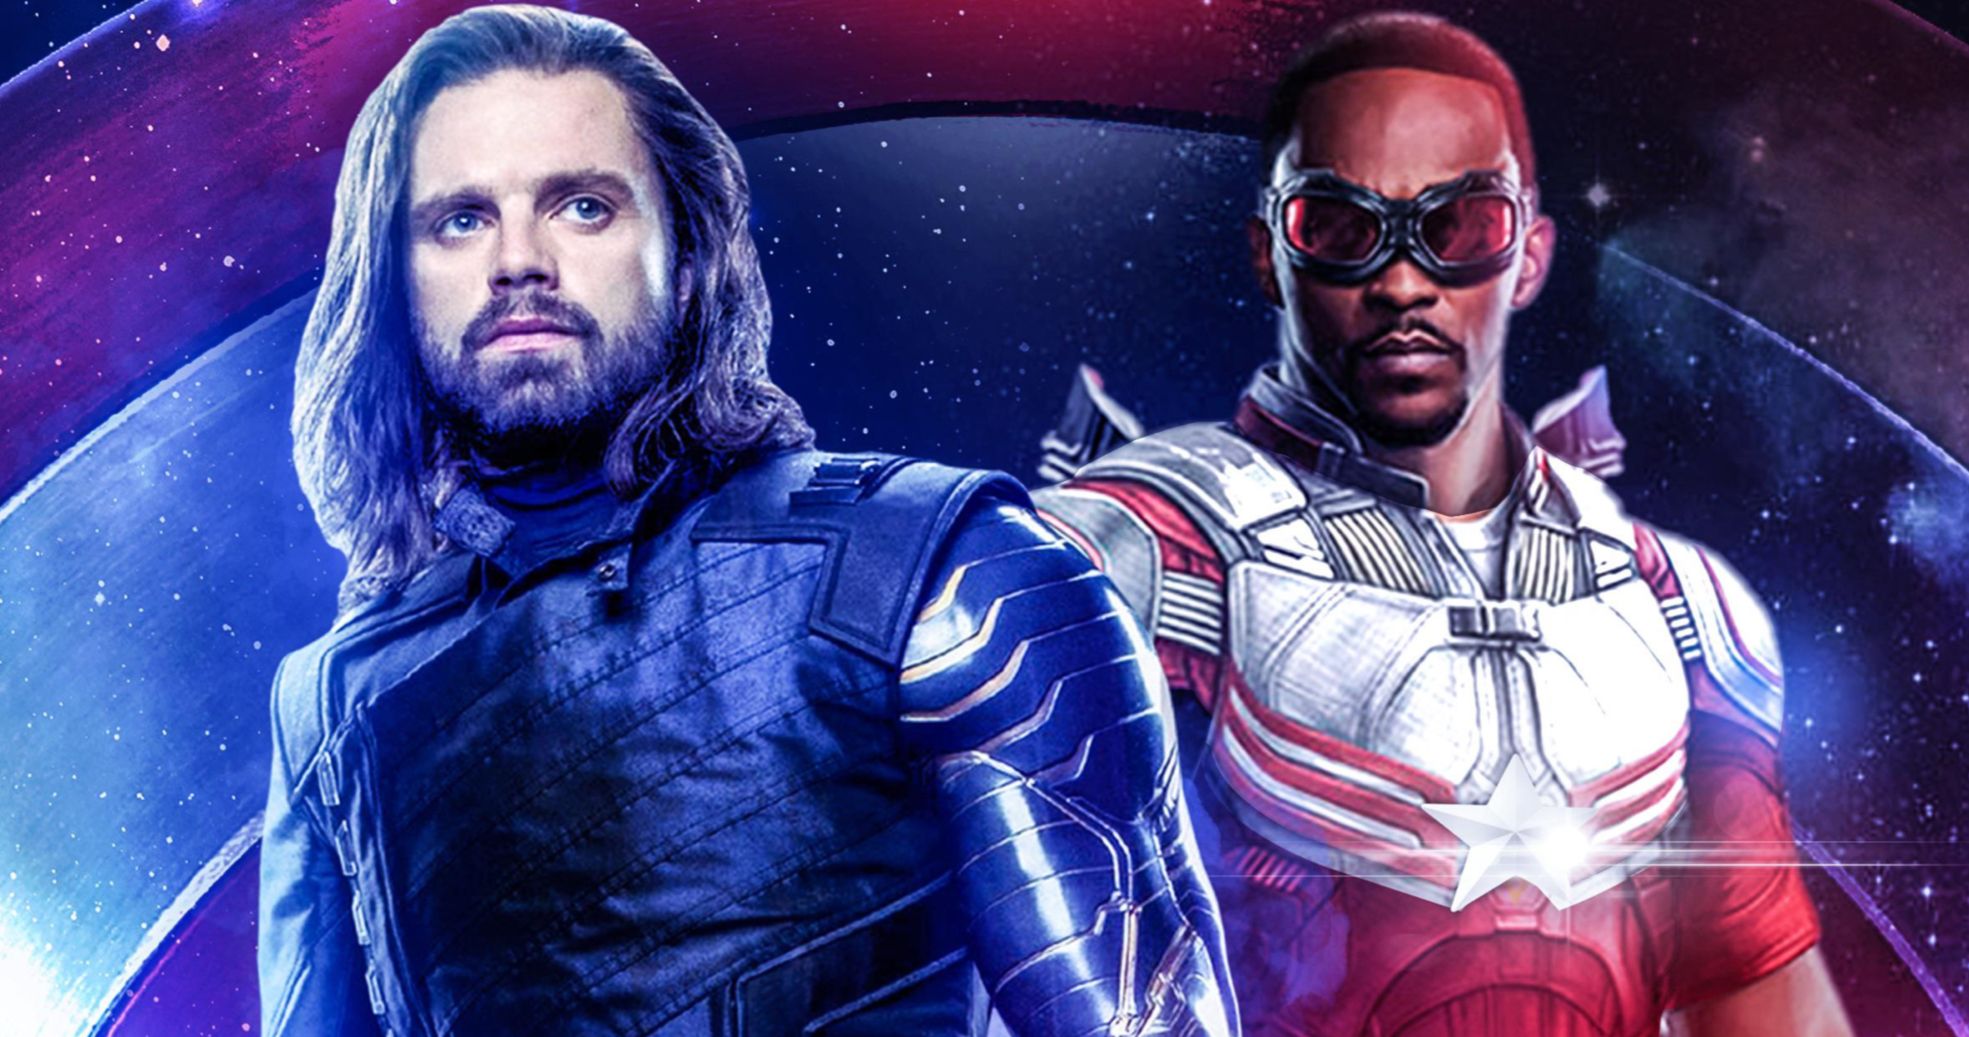 The Falcon and the Winter Soldier Won't Arrive on Disney+ This August After All